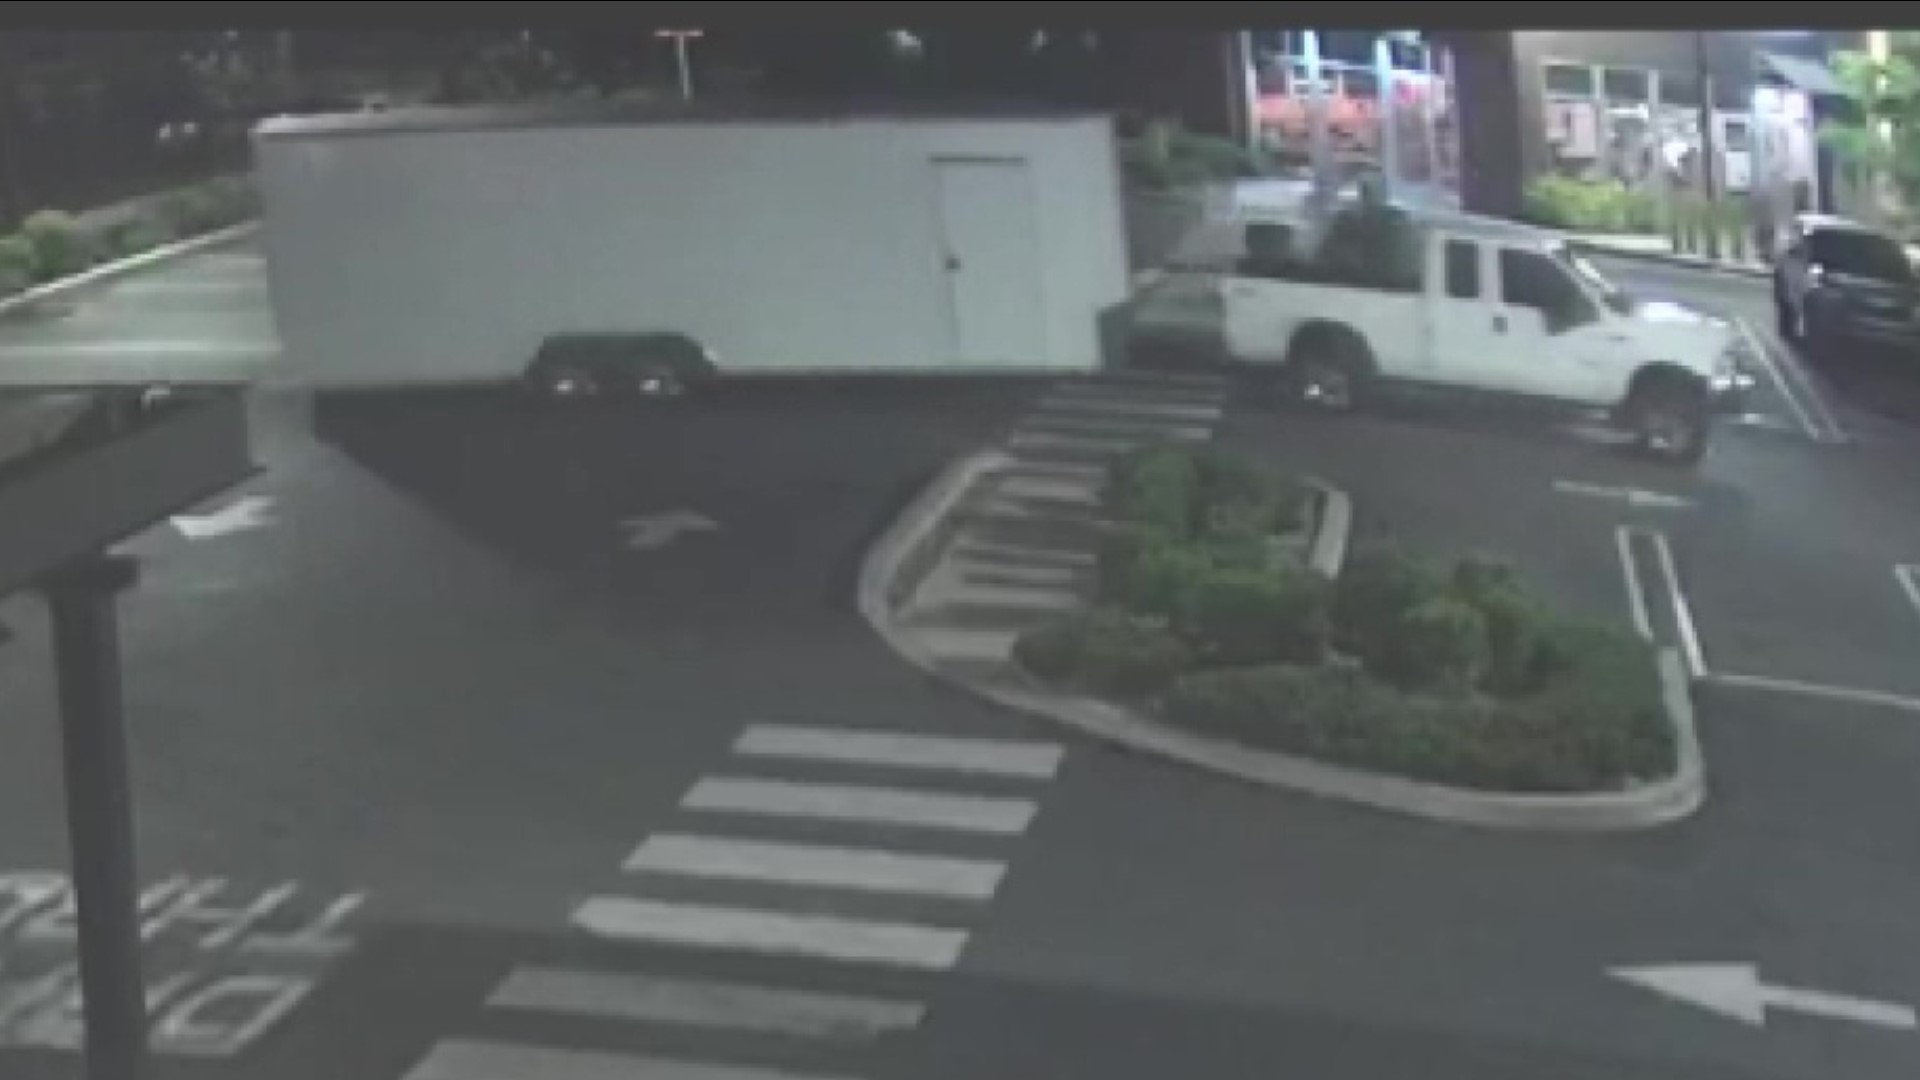 Surveillance video shows the suspect came earlier that night to scope it out before coming back to steal it.